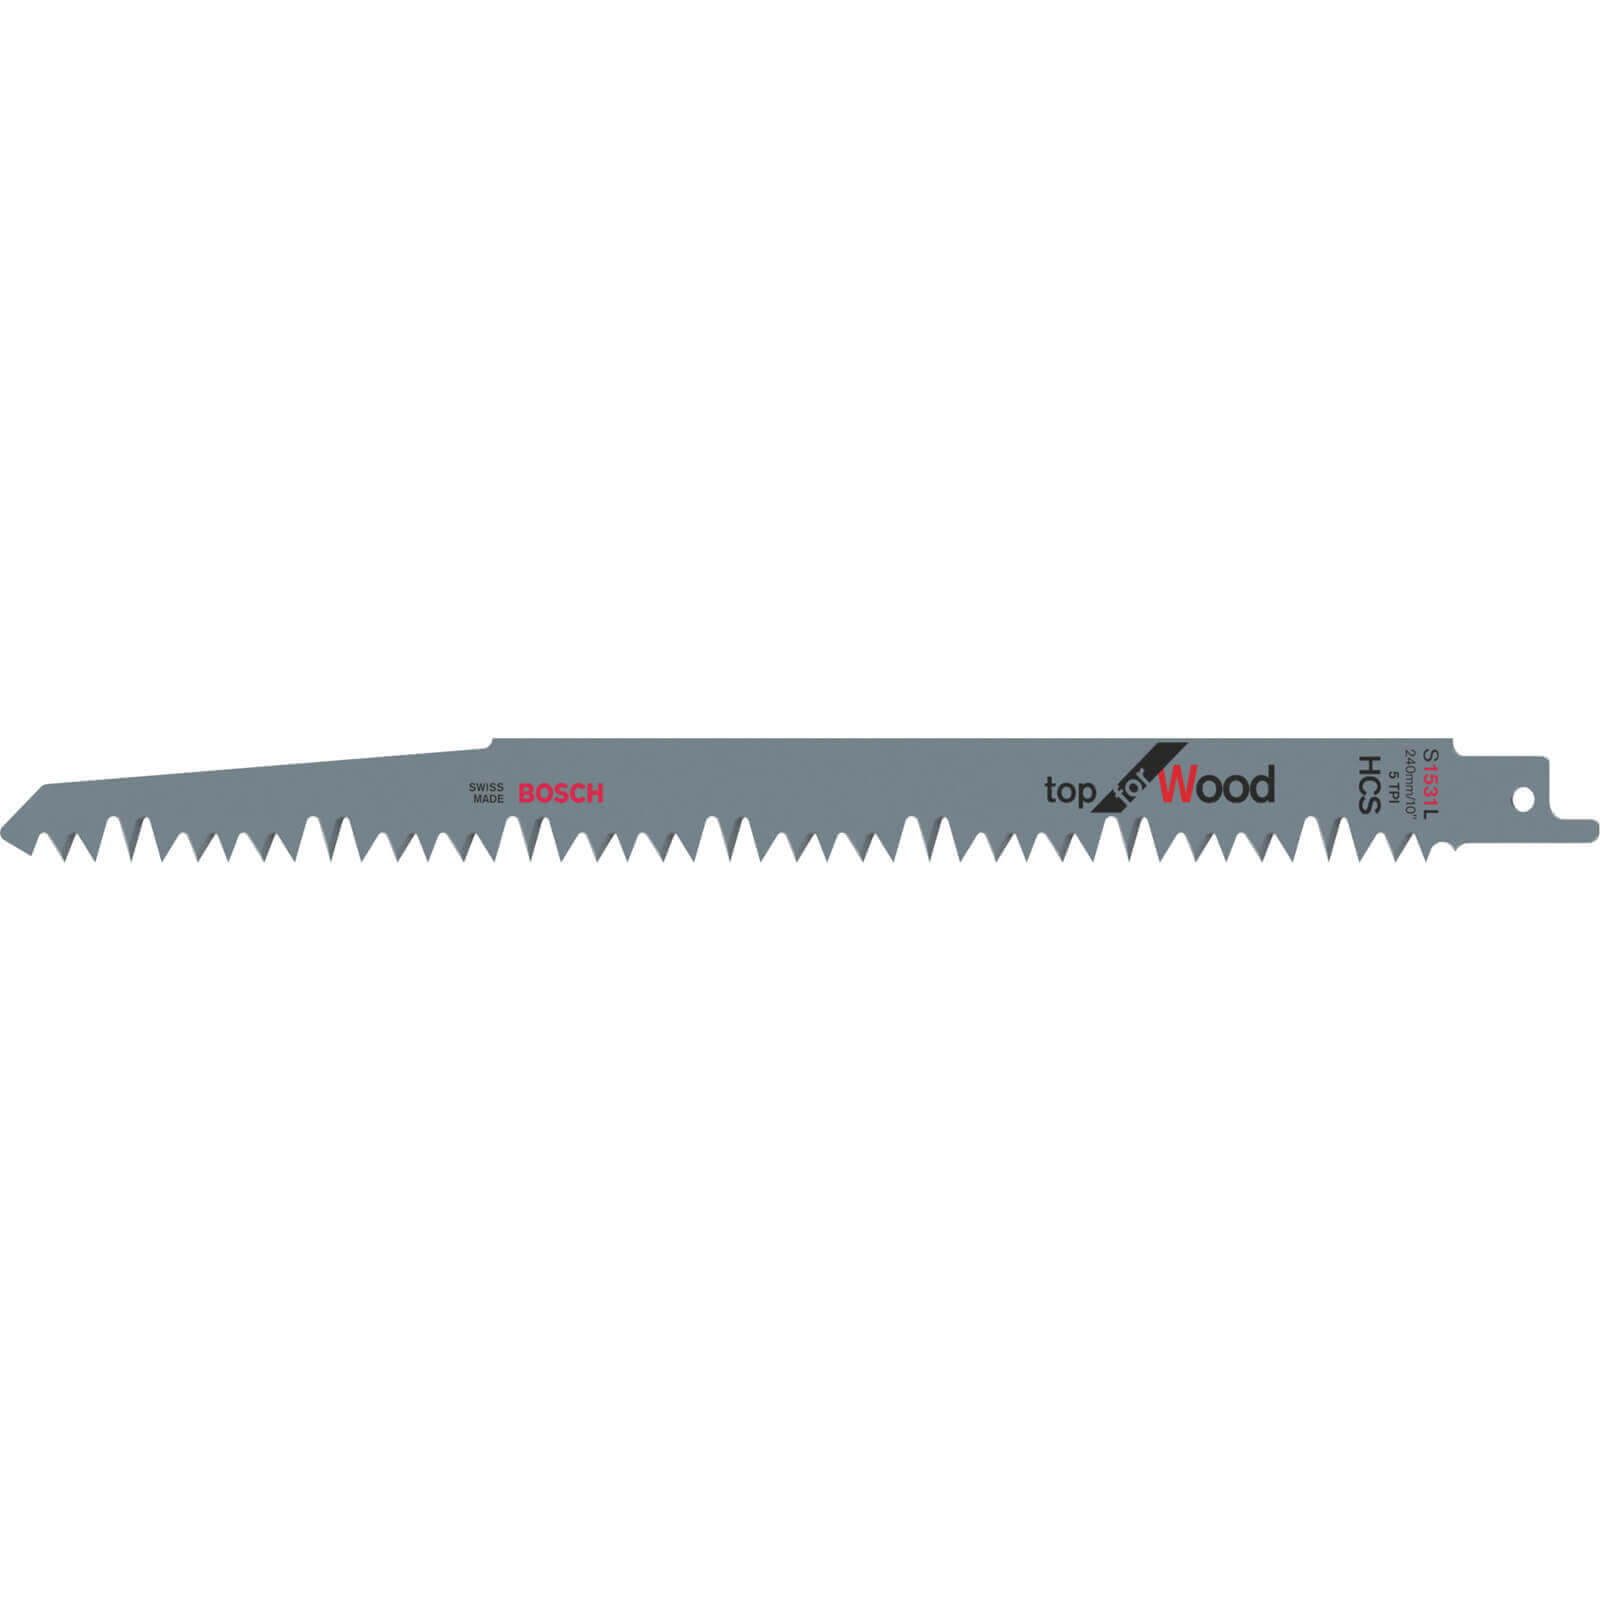 Image of Bosch S1531L Reciprocating Sabre Saw Blades Pack of 2